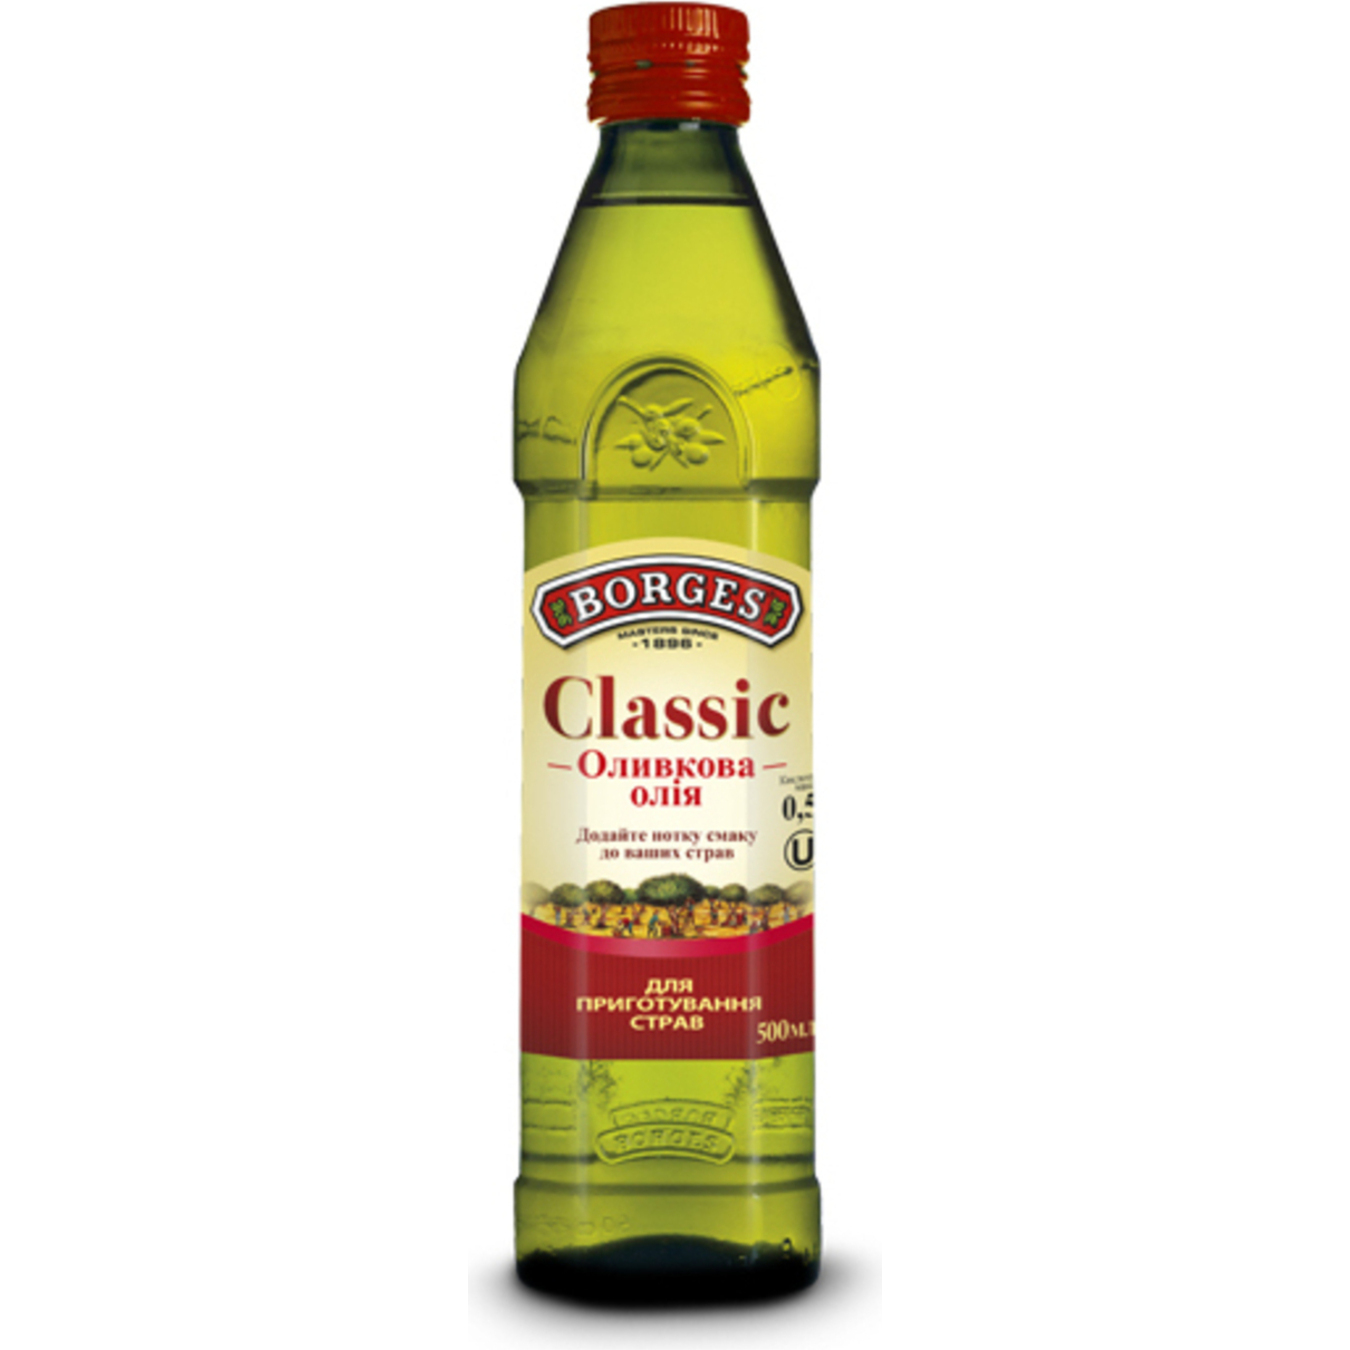 Borges Refined Olive Oil 500ml glass